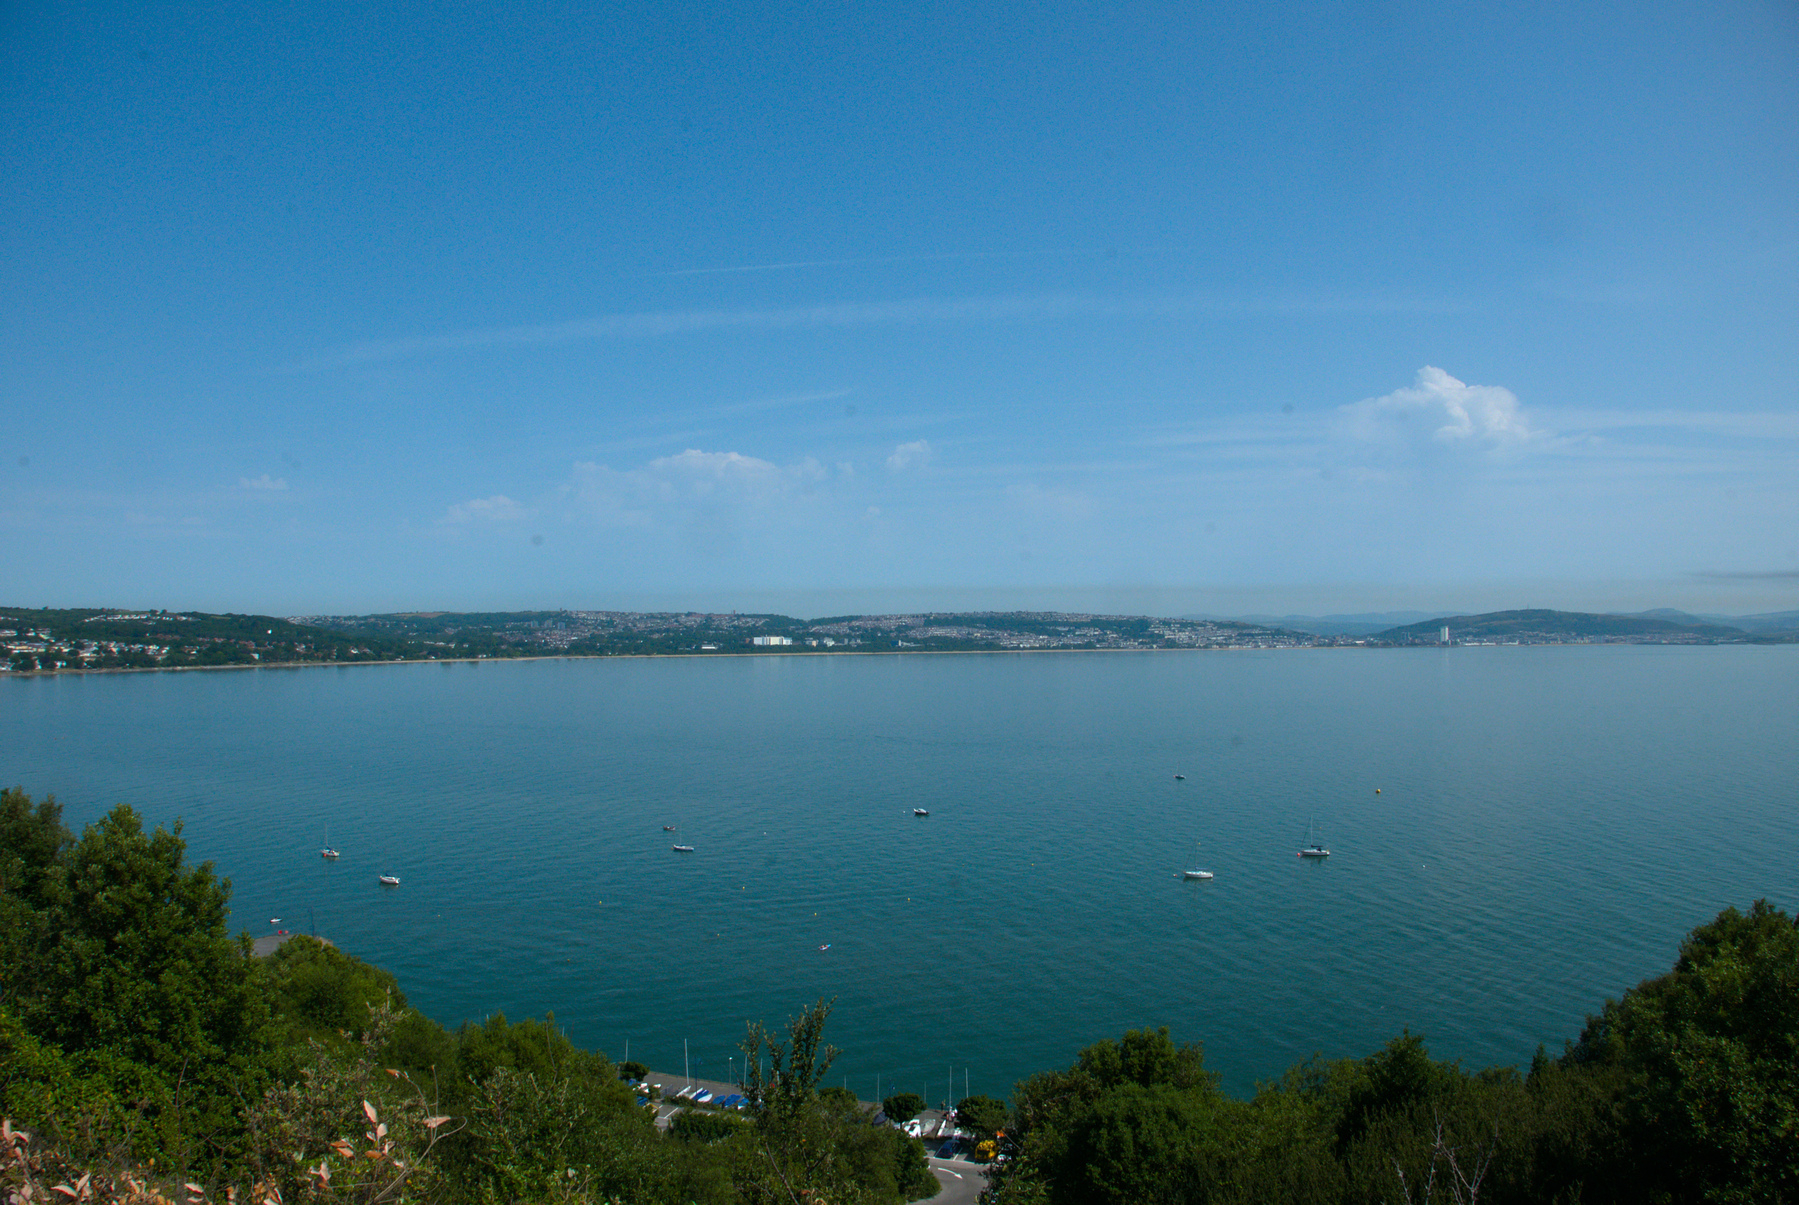 Photograph of a bay with a few scattered small boats and buoys. The sky and water are blue, and the land is green.